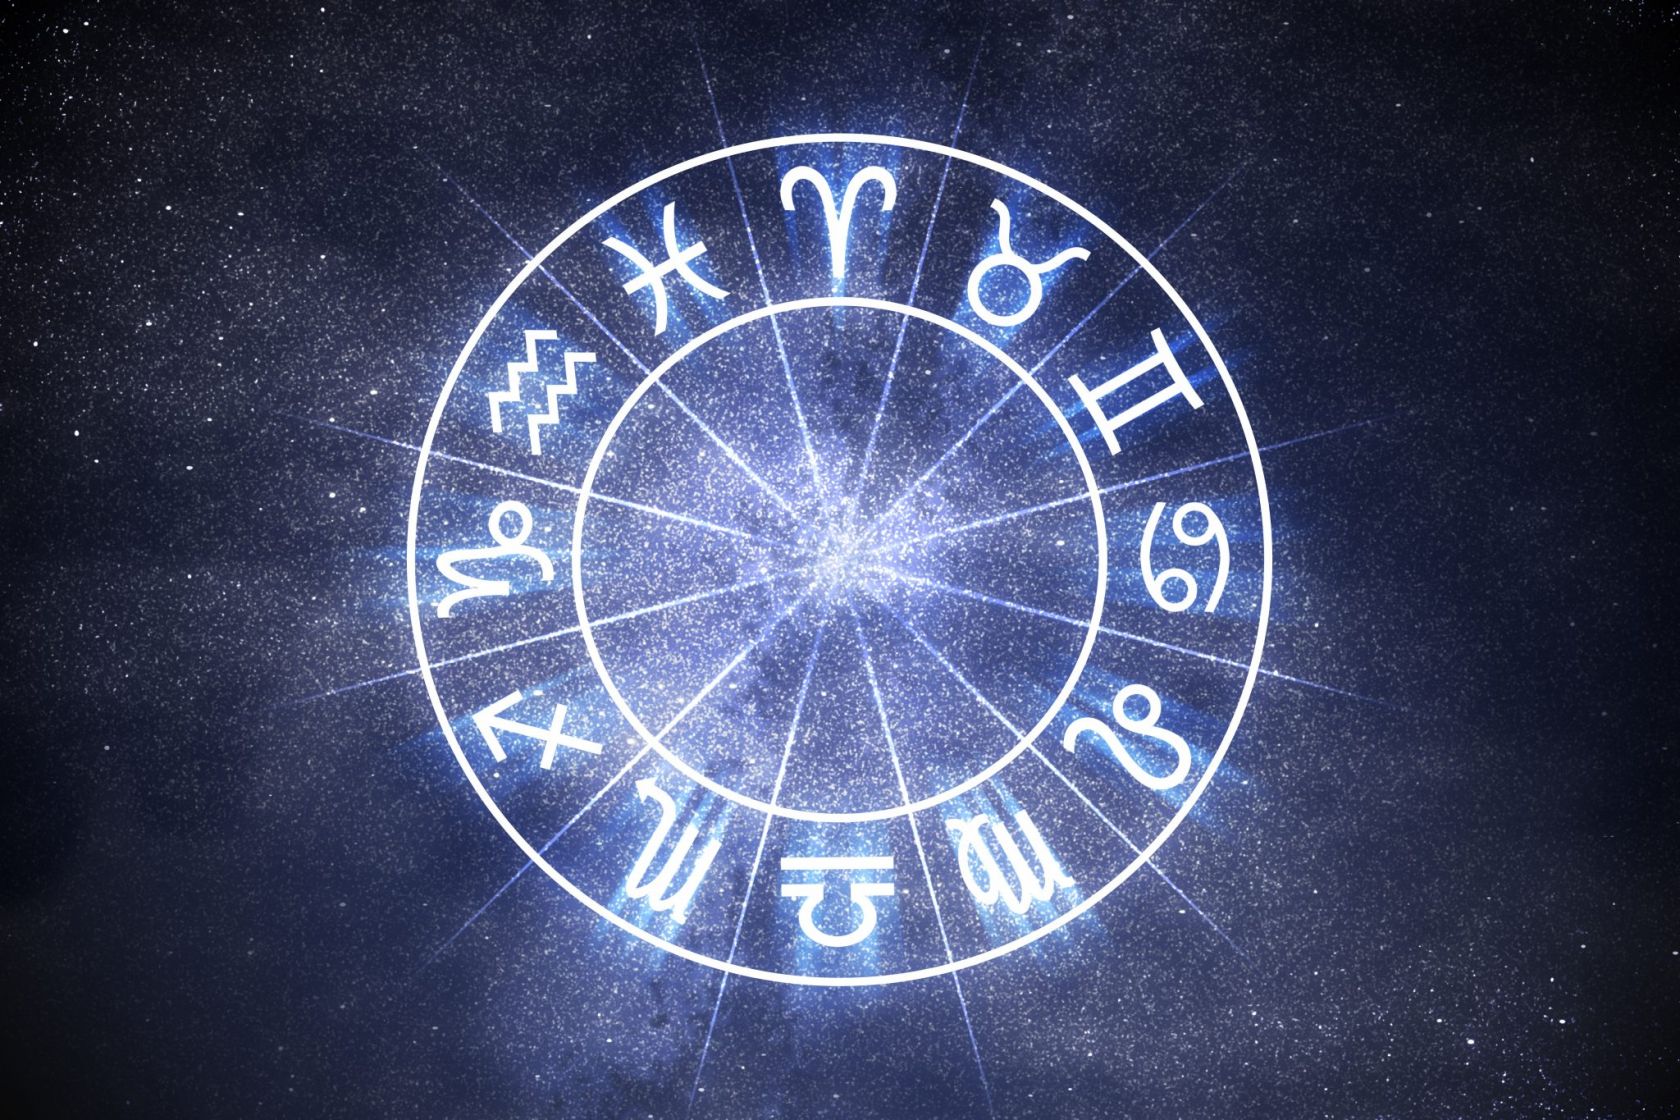 what astrology sign is december 4